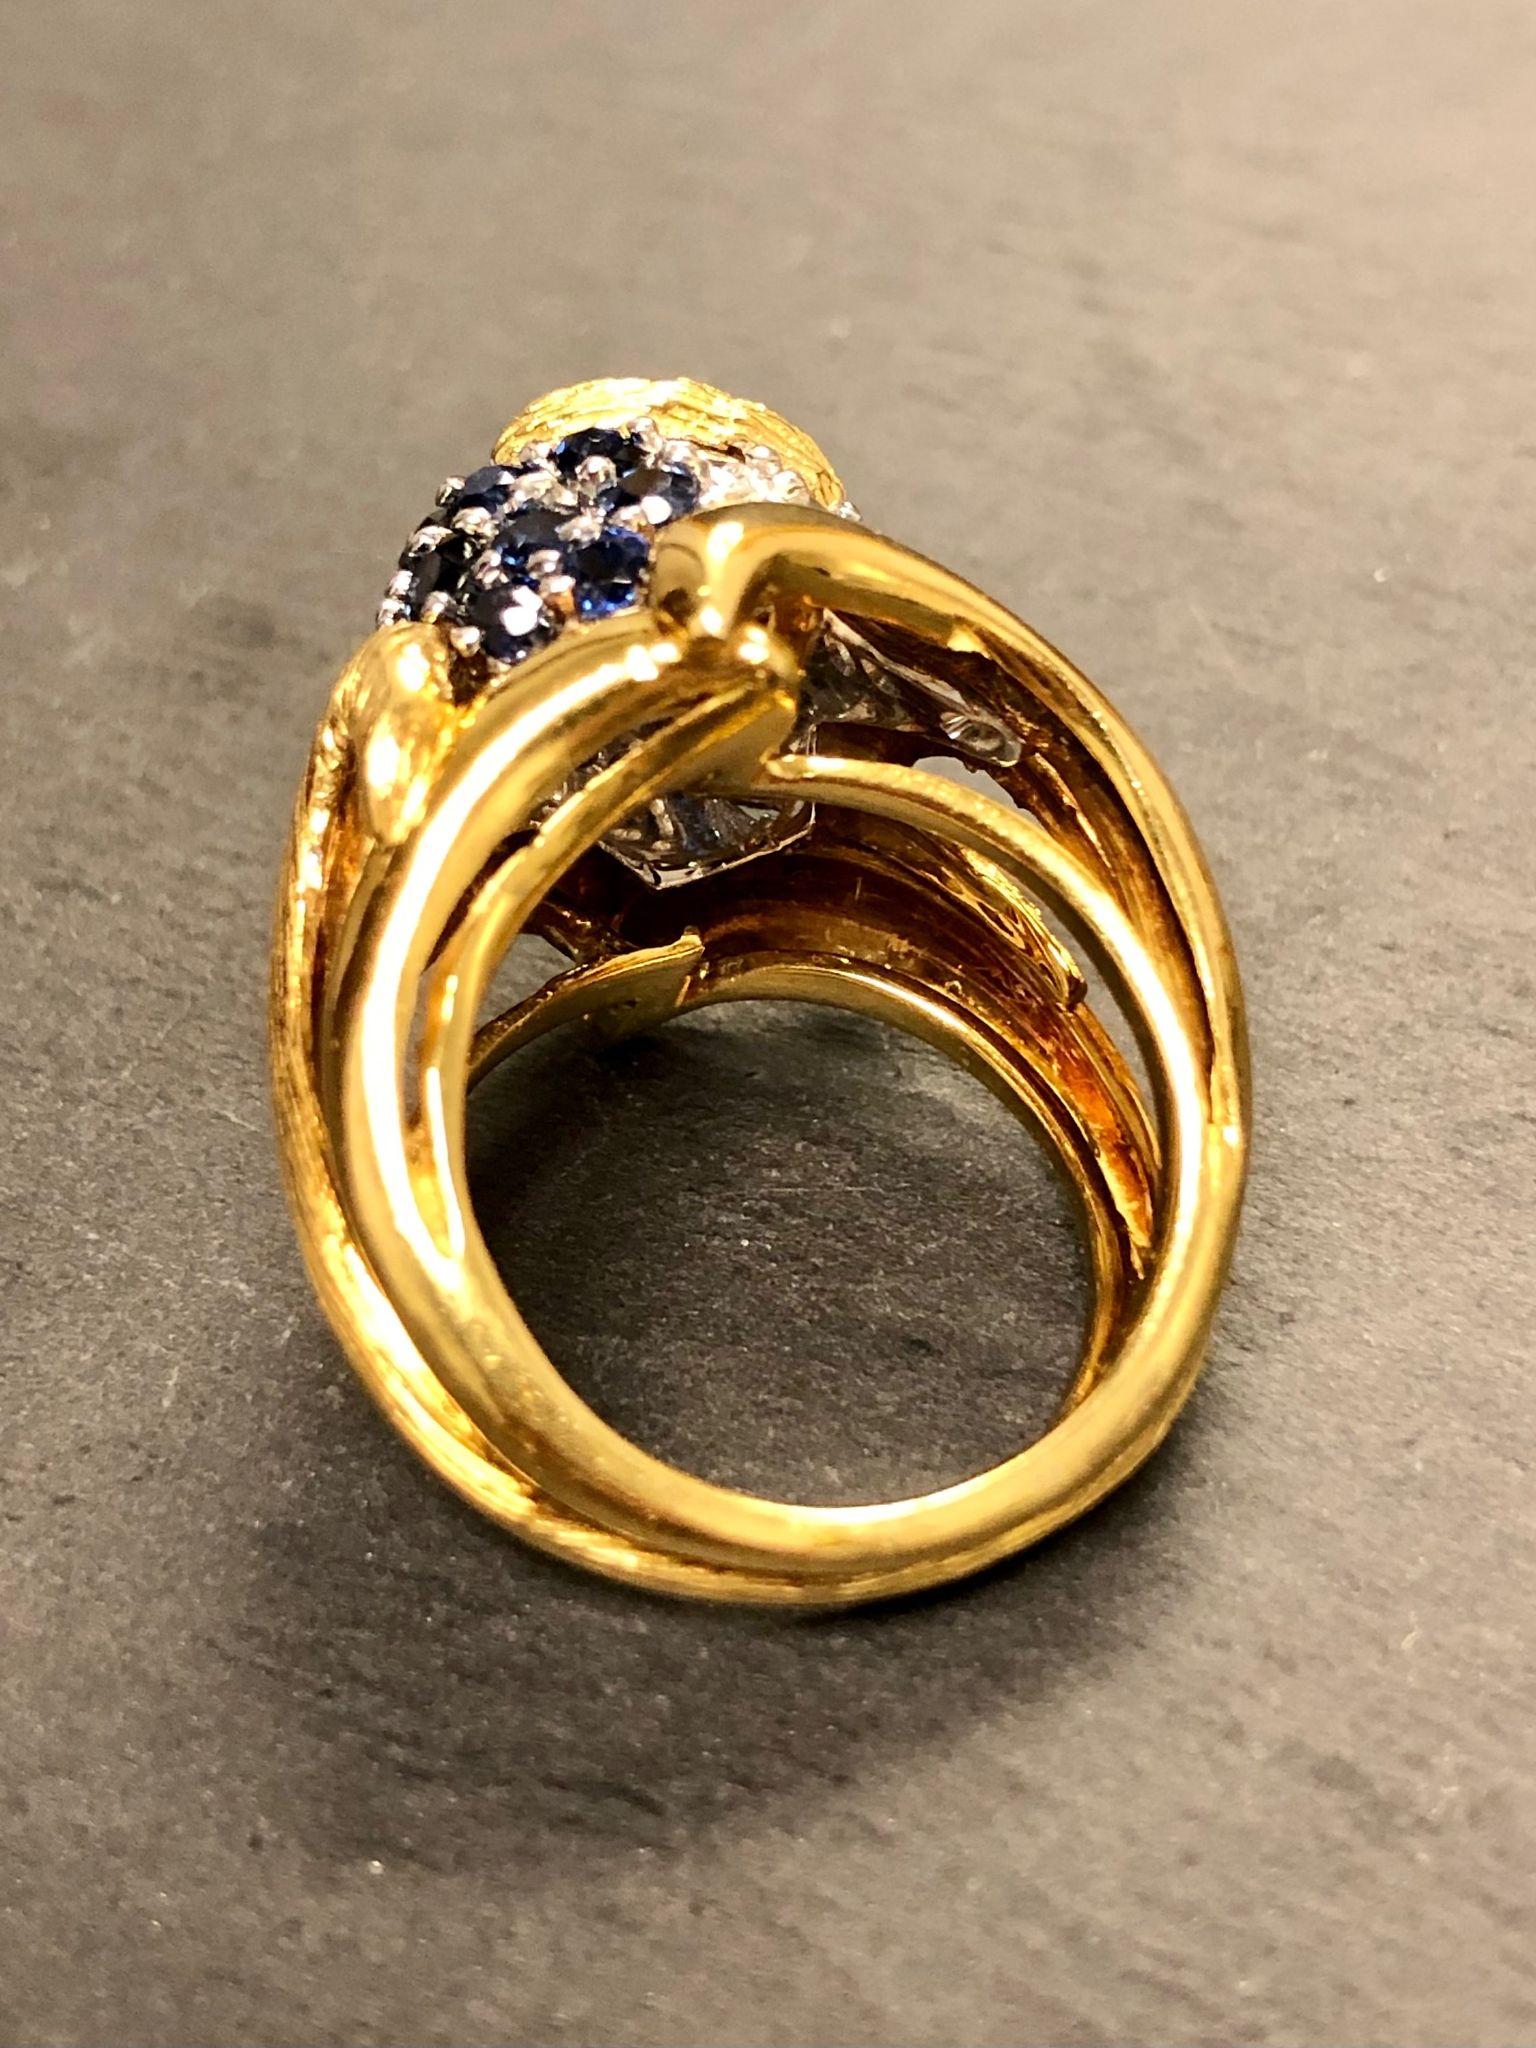 A gorgeously made ring and absolutely full of detail both inside and out. It has been set with approximately 1cttw in G-H Vs2-Si1 clarity round diamonds as well as approximately 1cttw in beautiful natural blue sapphires.

Condition
All stones secure